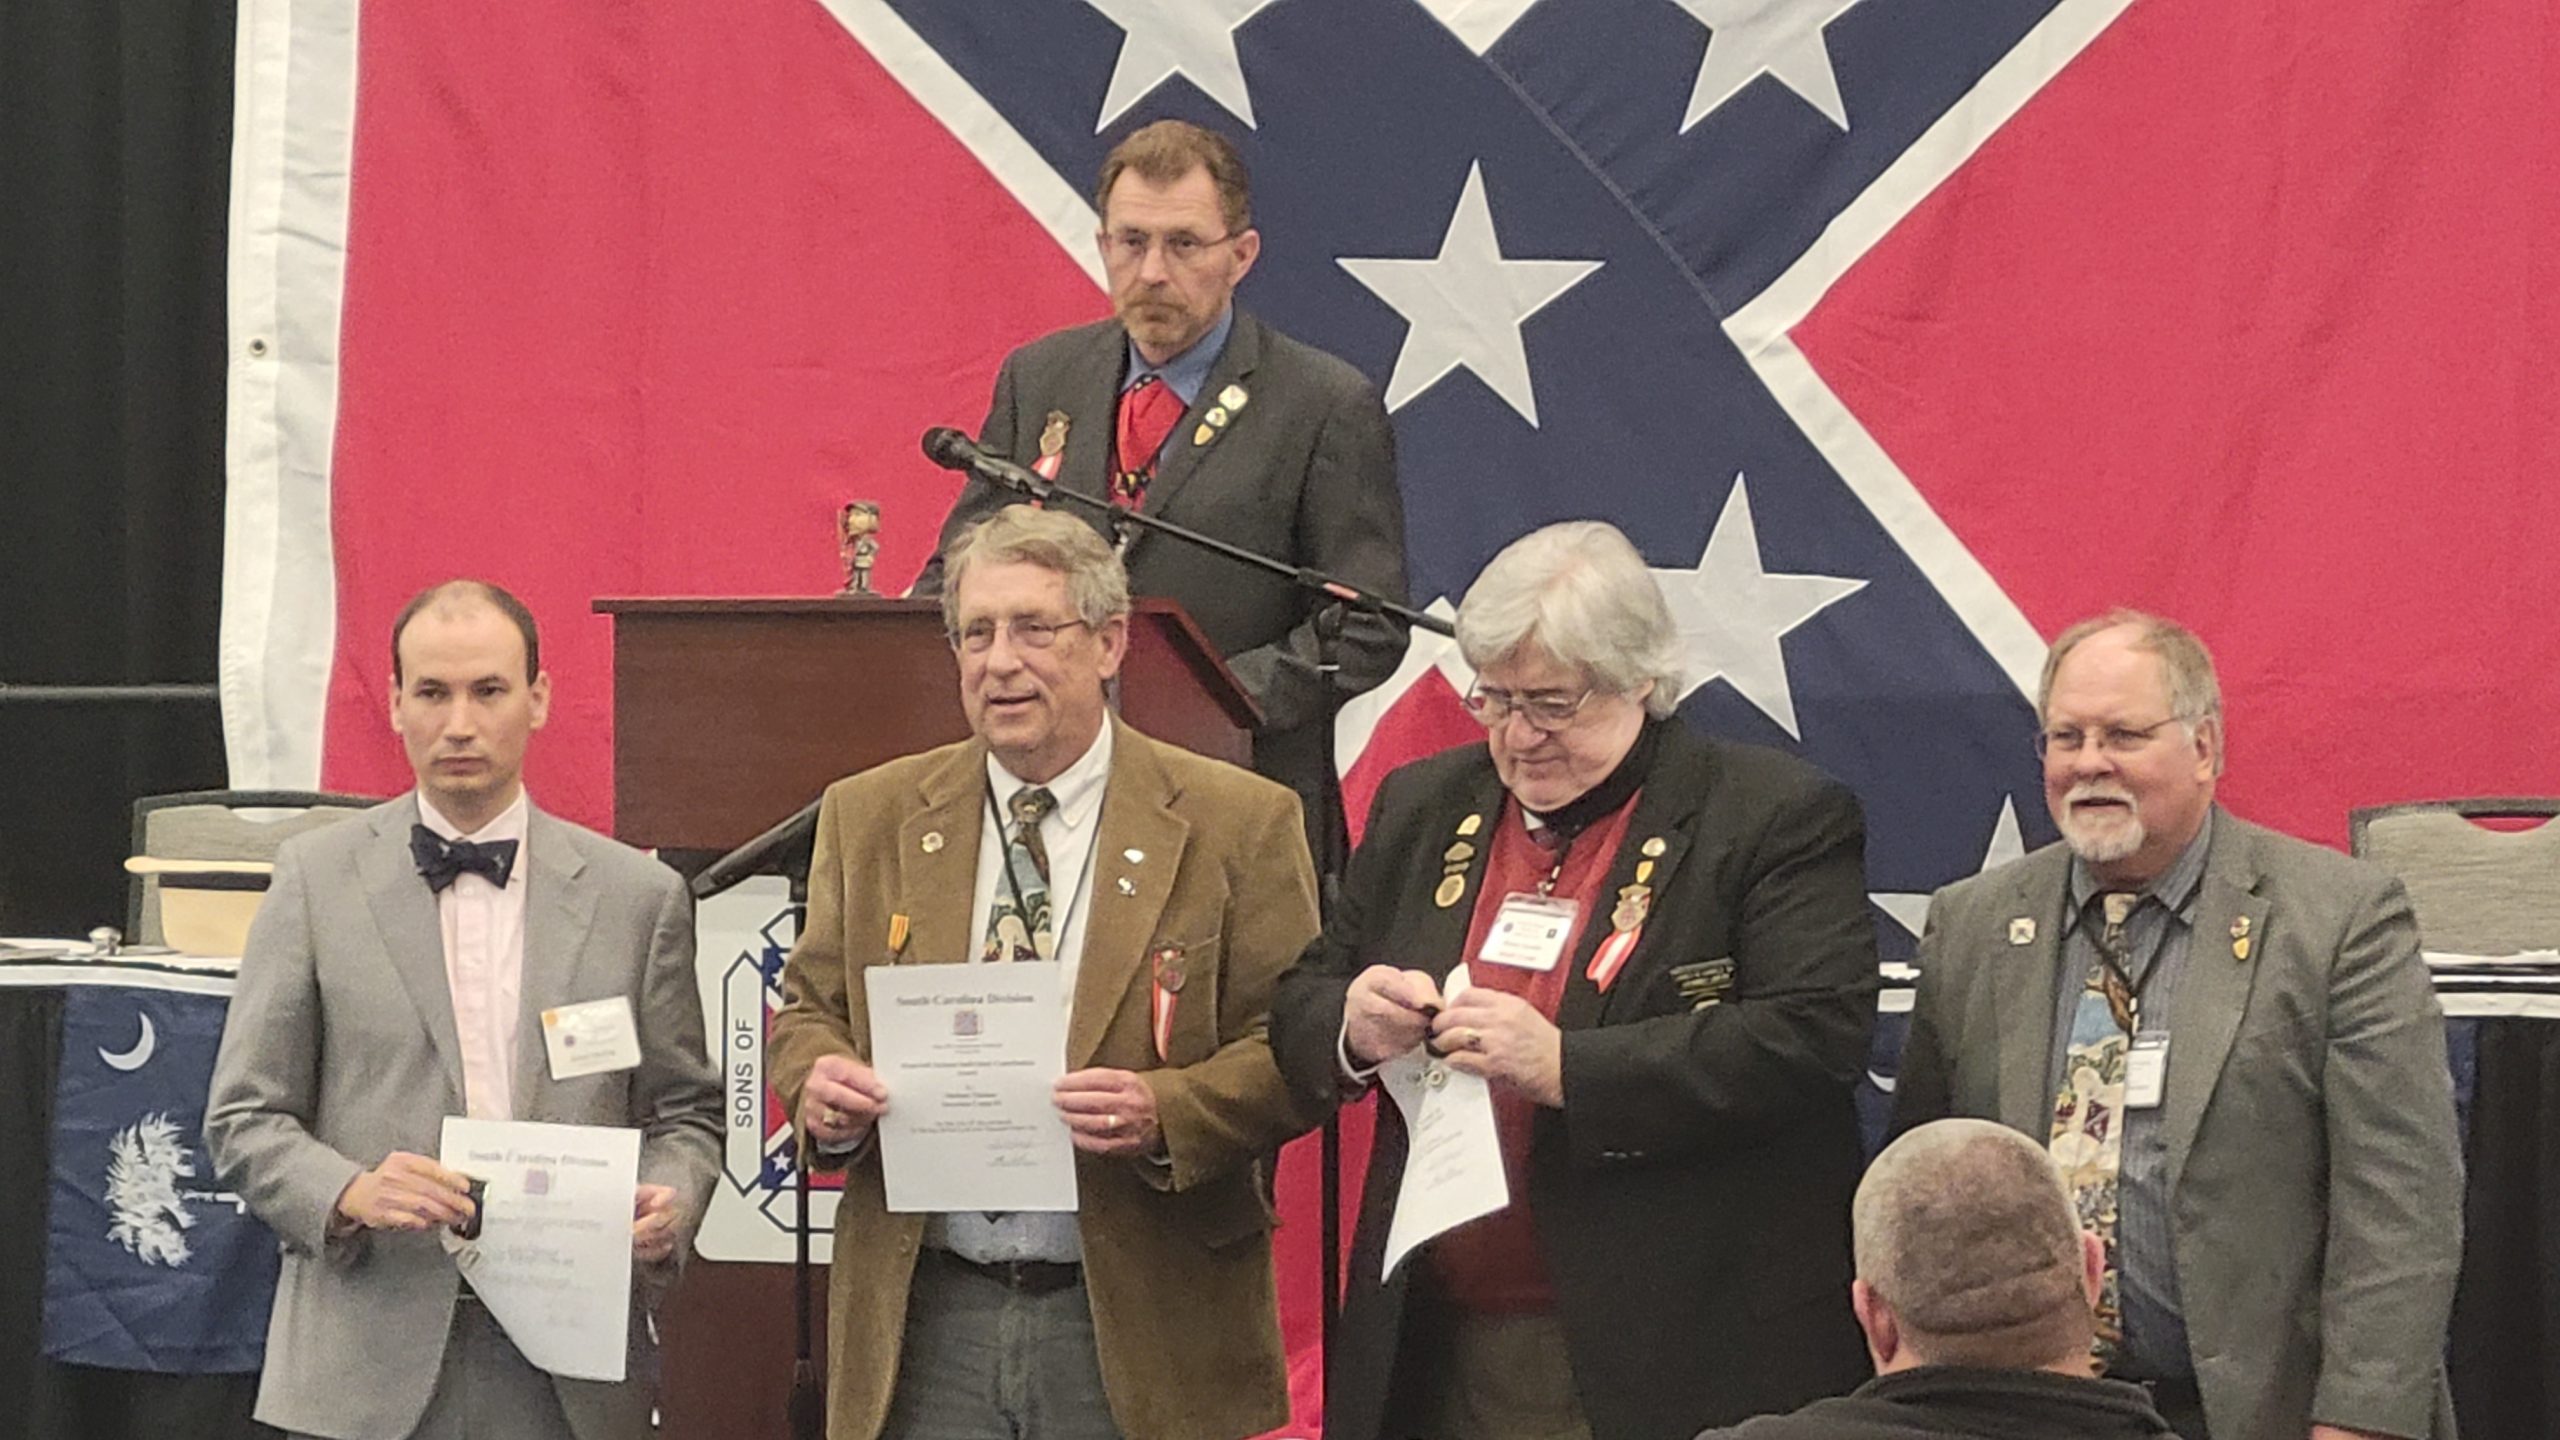 Sons of Confederate Veterans South Carolina Florence Convention 2021-03-20 14.06.30